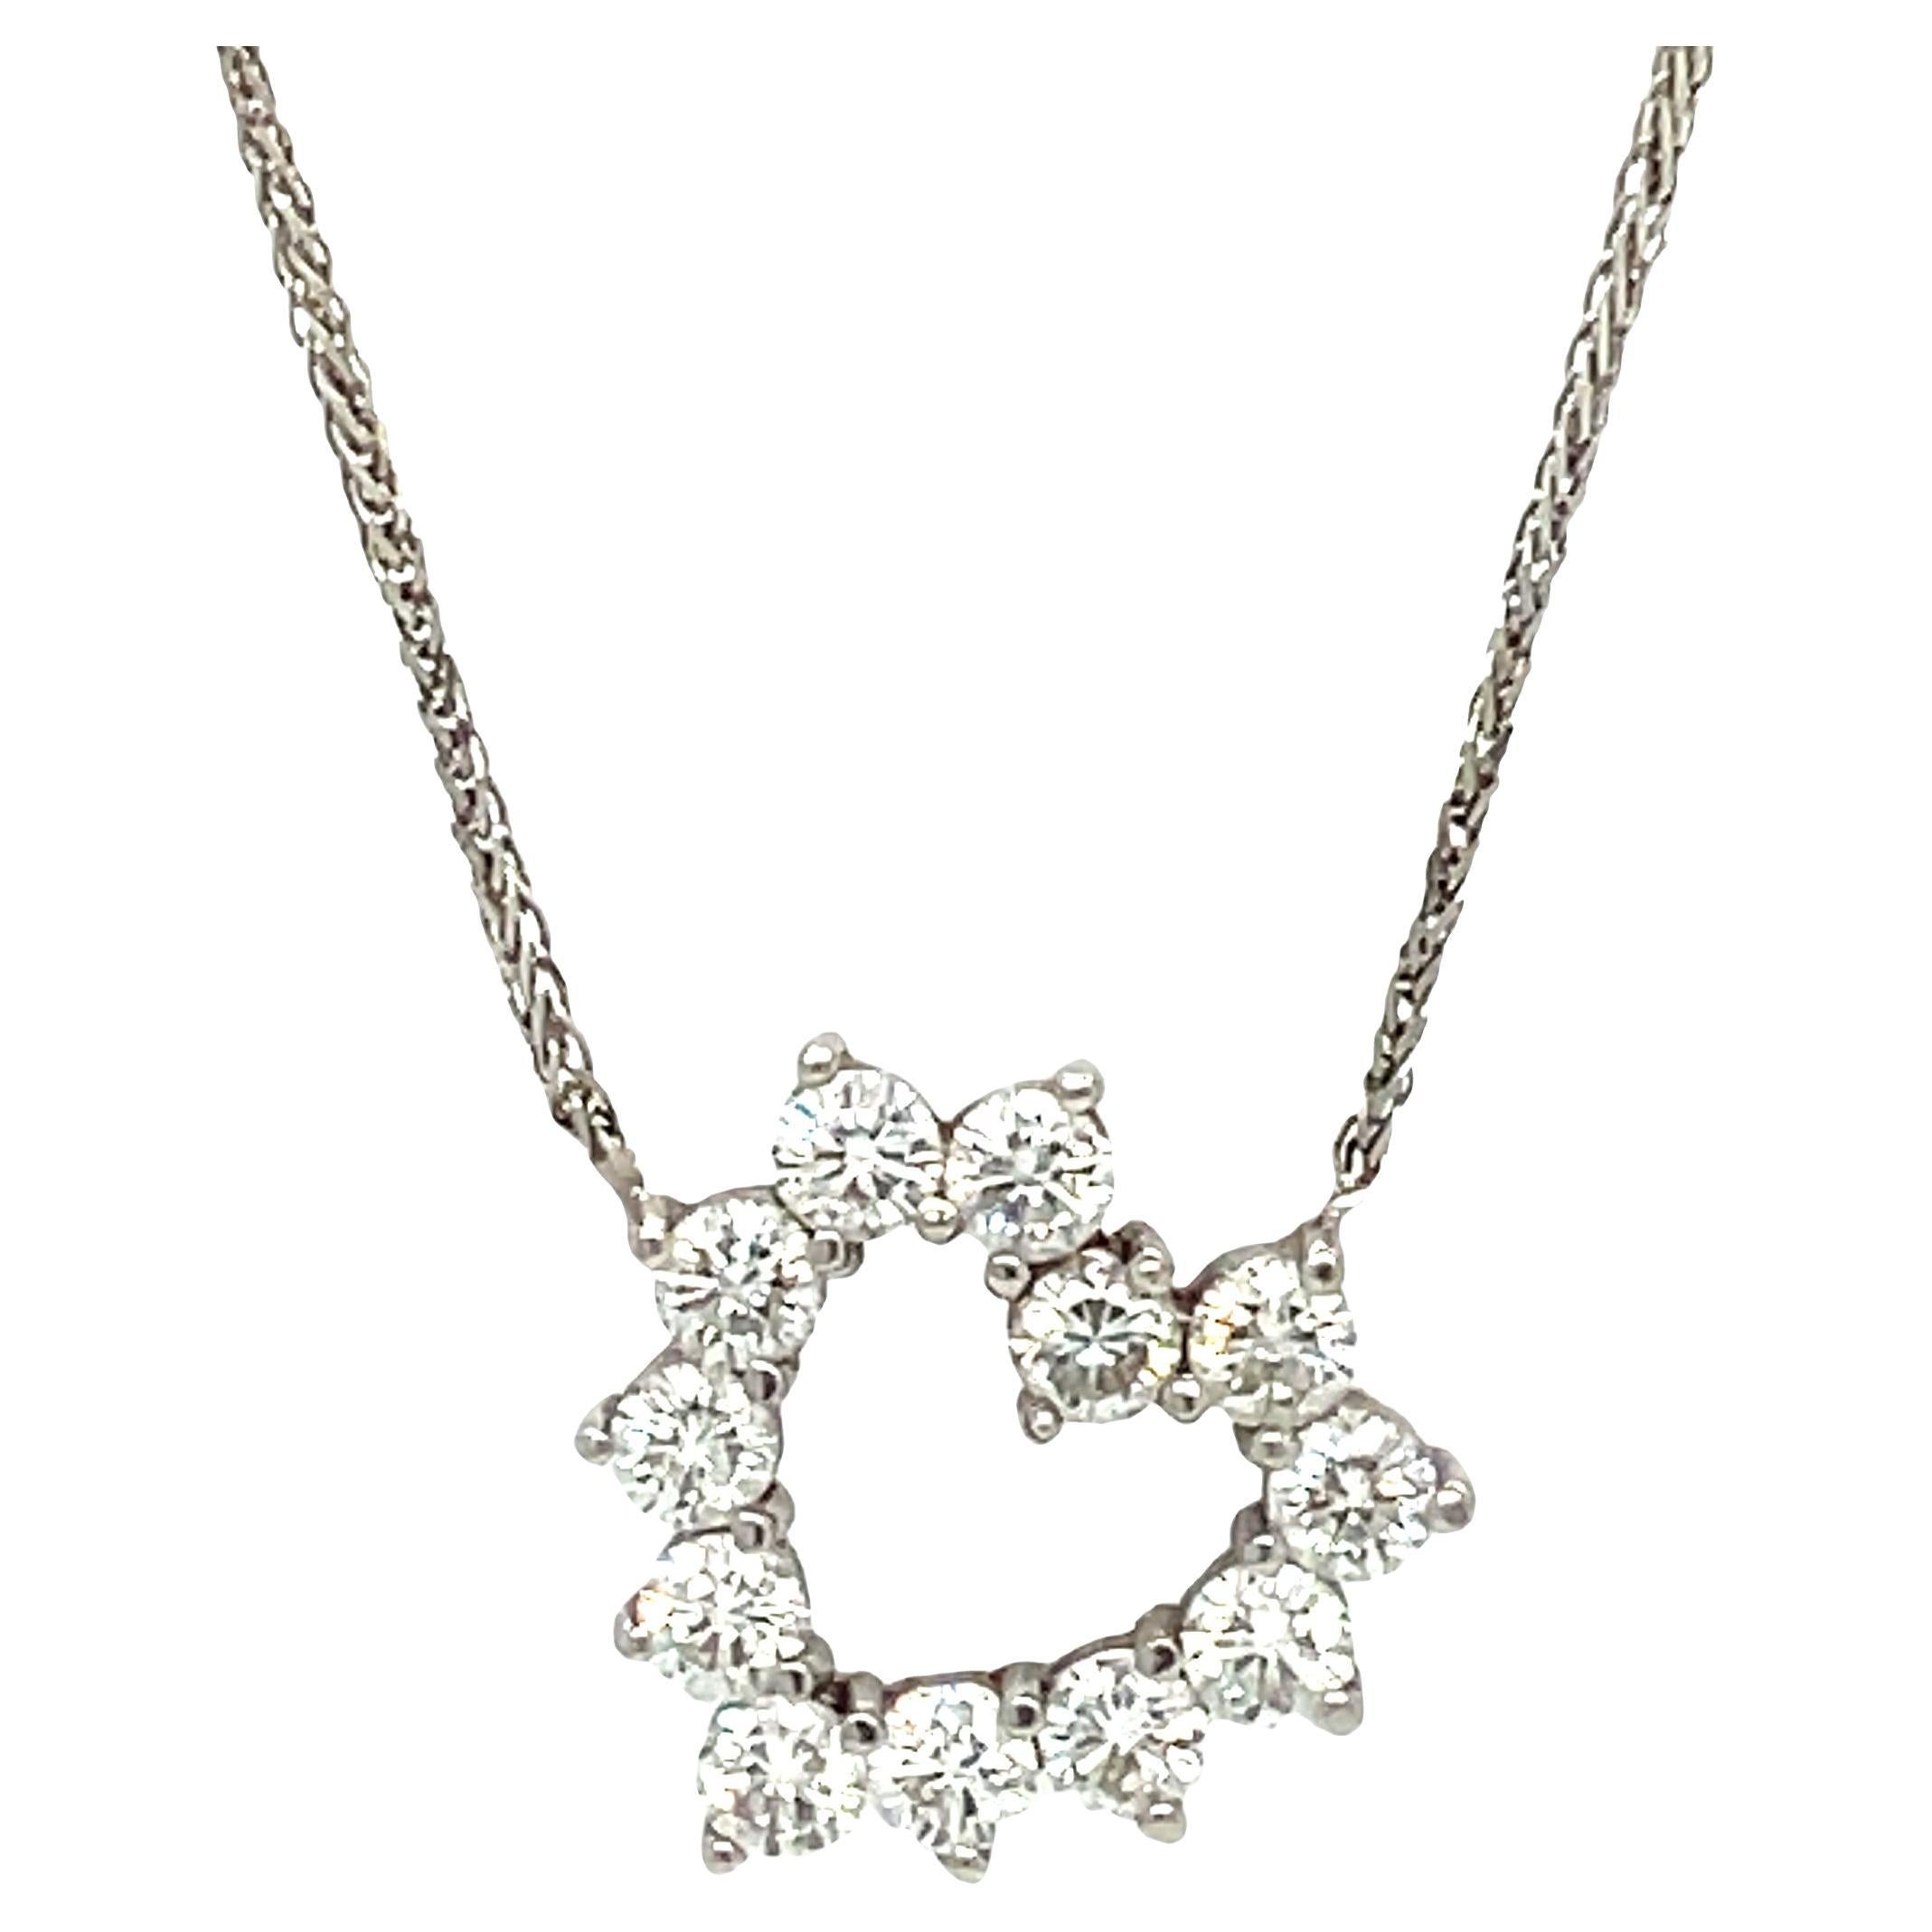 Love at first sight. This eye catching diamond heart pendant necklace is a sparkling symbol of love. The necklace showcases bright and beautiful round diamonds that will make her heart skip a beat. 

Crafted in 14K white gold, this romantic pendant